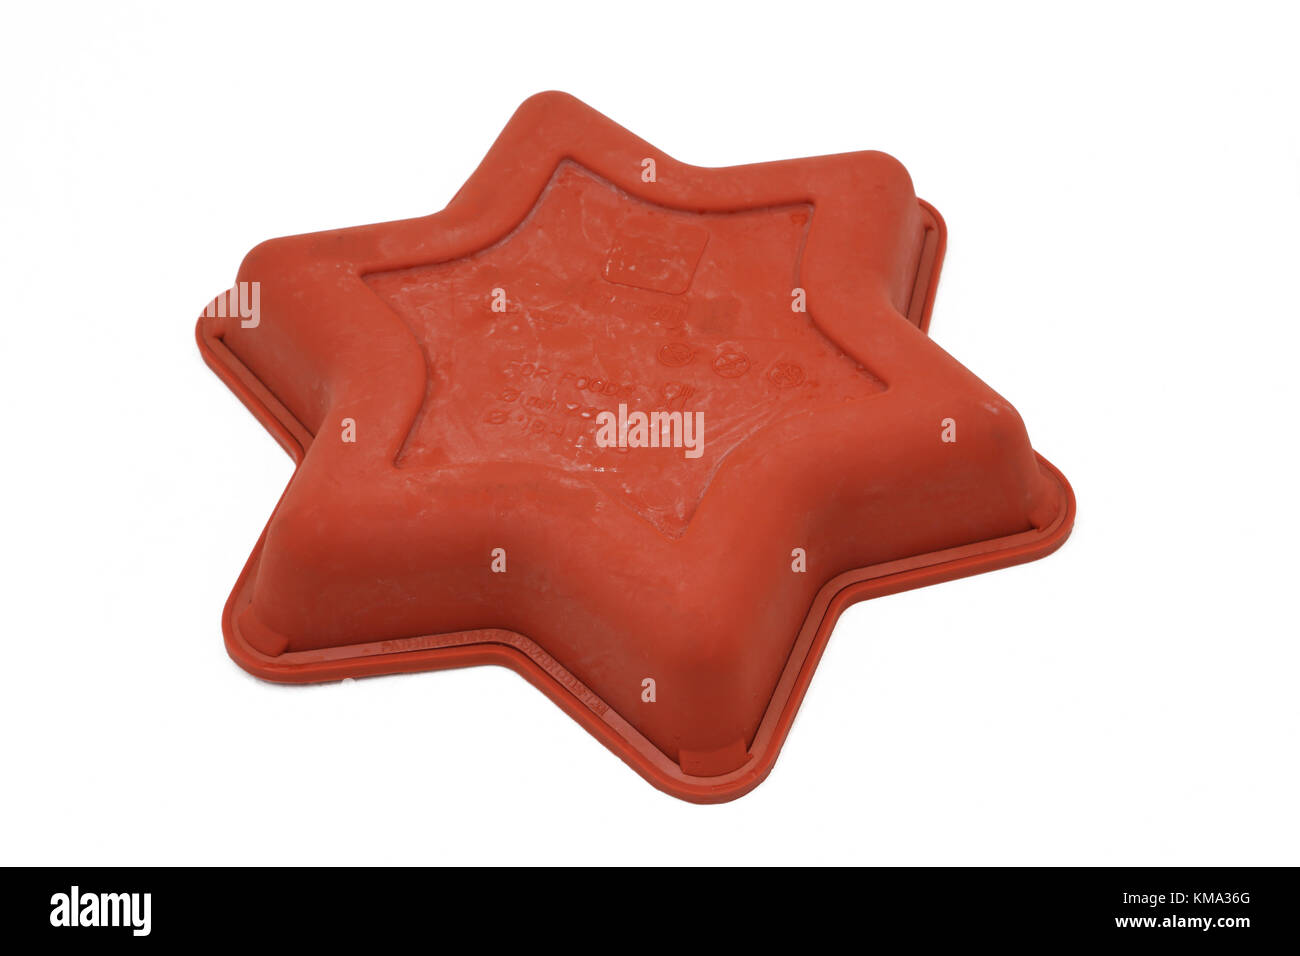 Silicone Star Shape Cake Mould Stock Photo